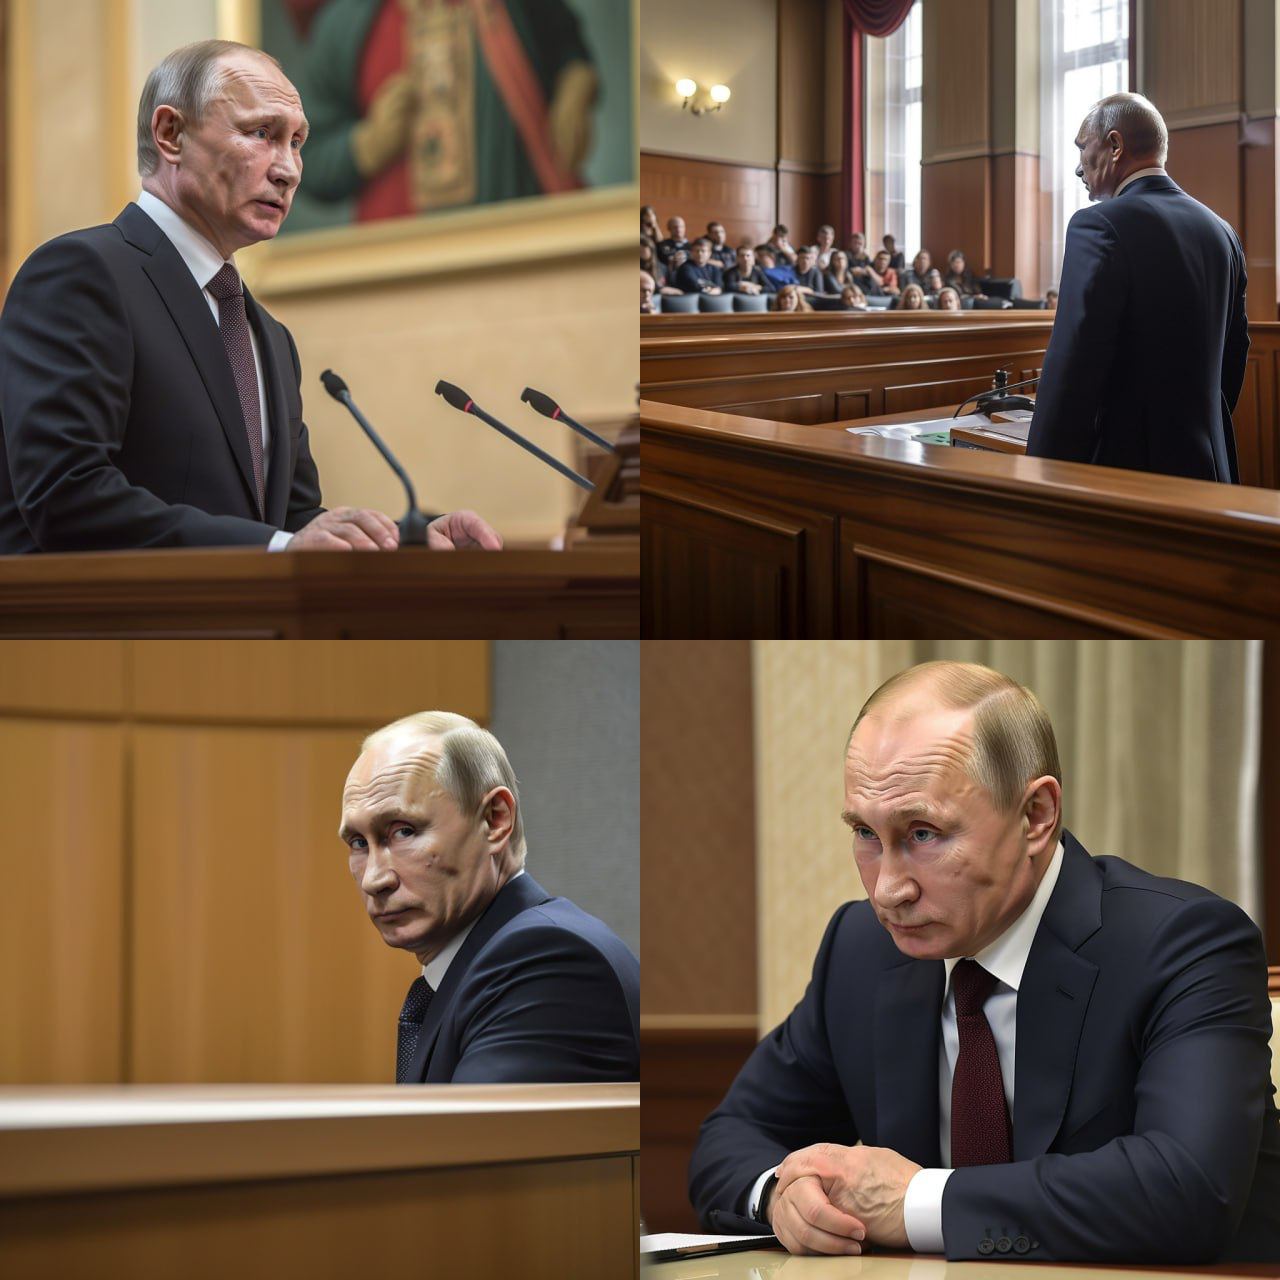 putin in The Hague thru the eyes of a neural community